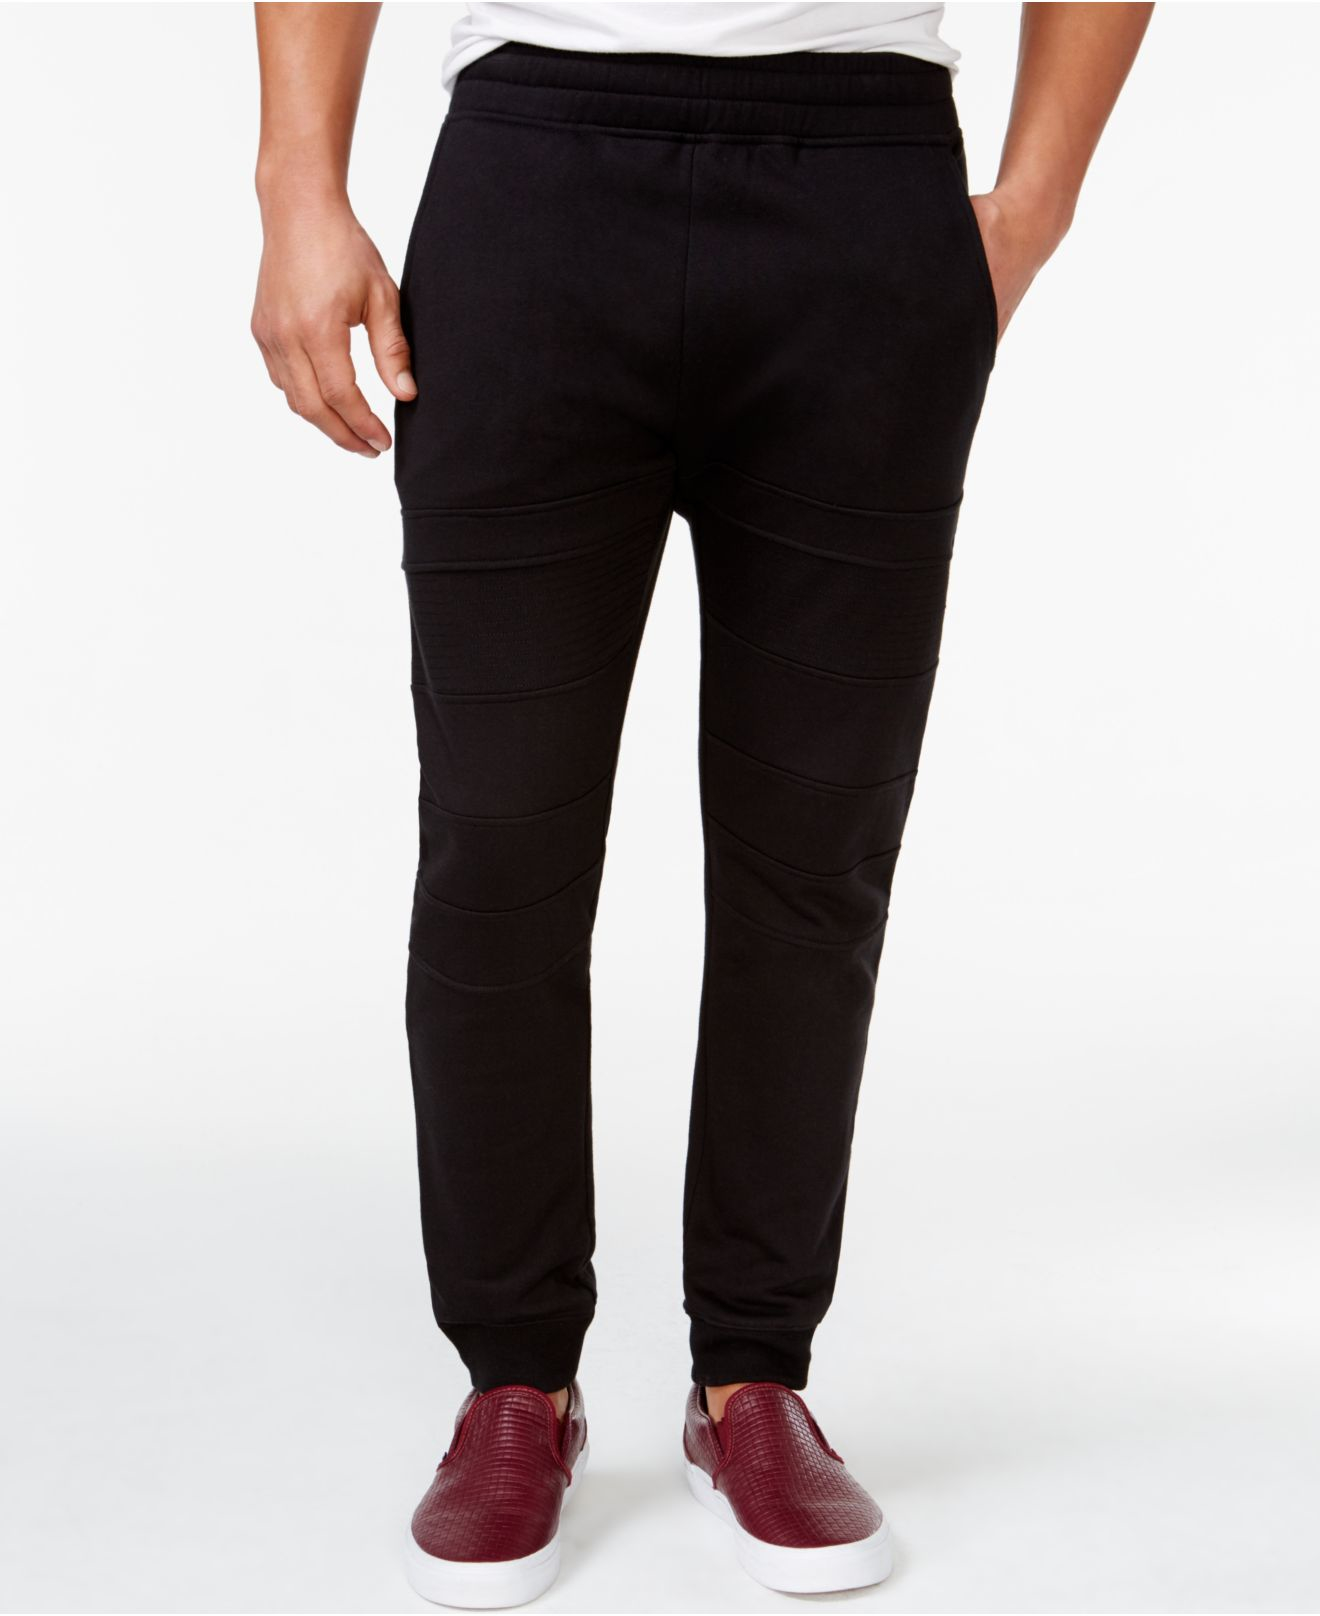 Inc international concepts Men's Horoscope Jogger Pants, Only At Macy's ...